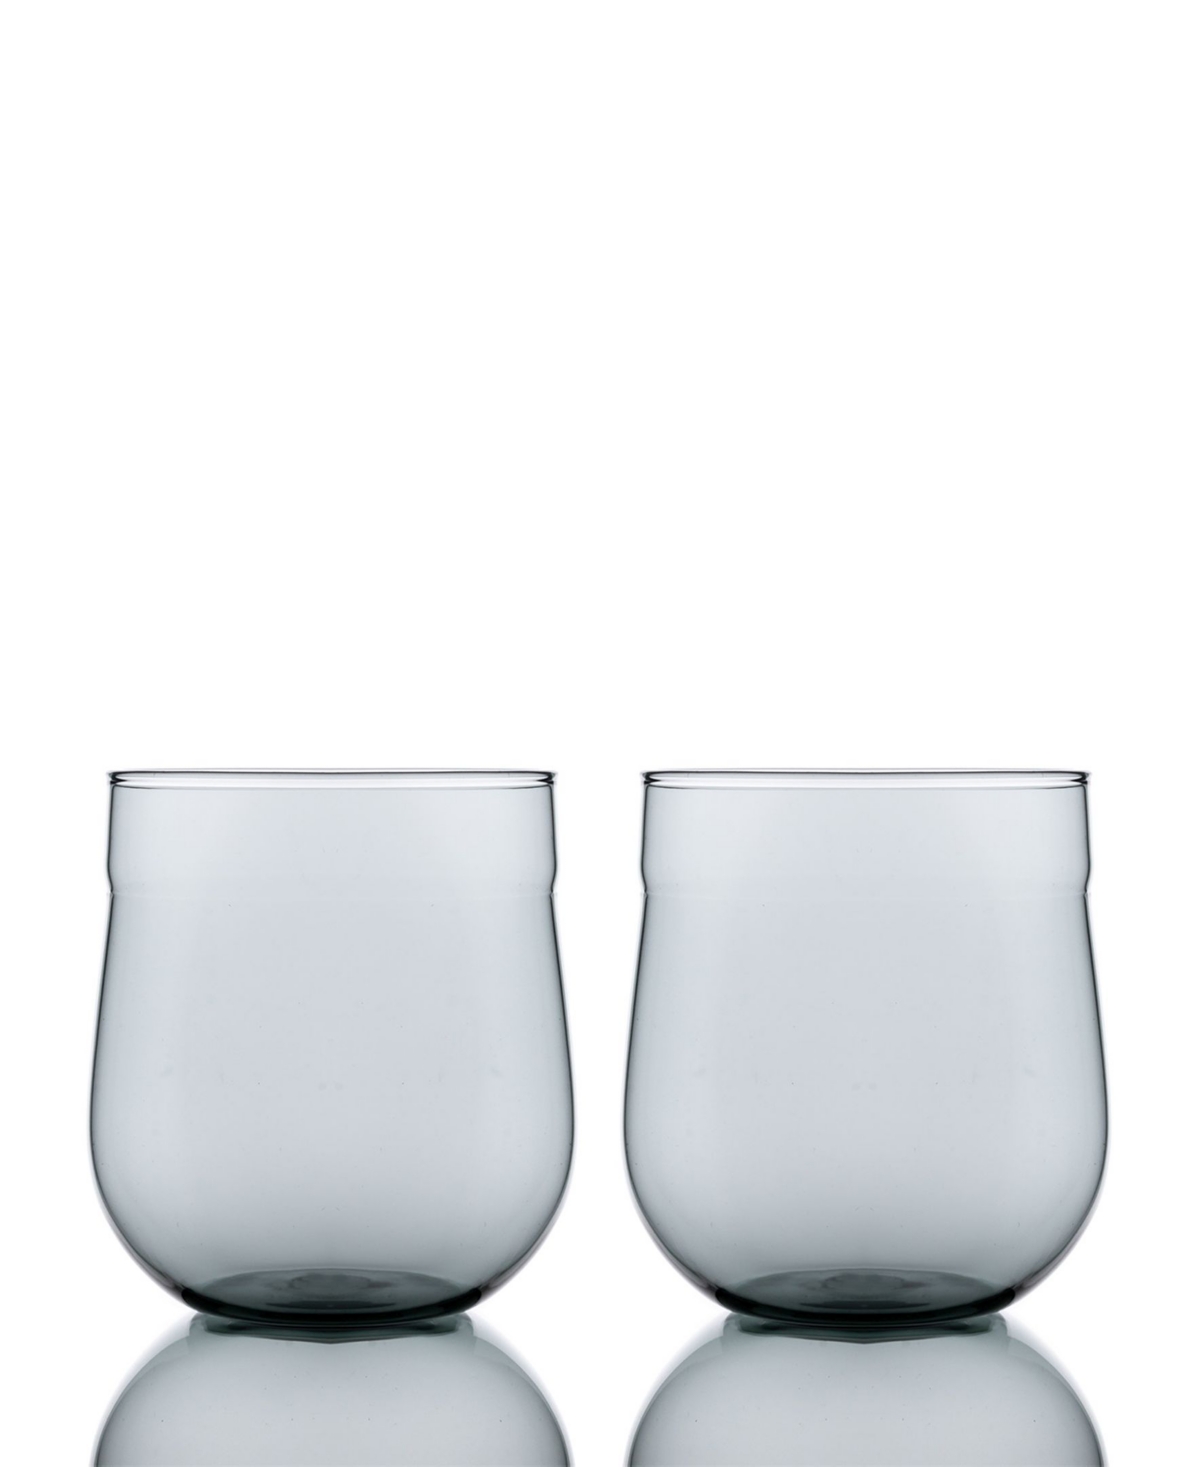 Bomshbee Angle Bell Double Old Fashioned Glasses - Set of 2